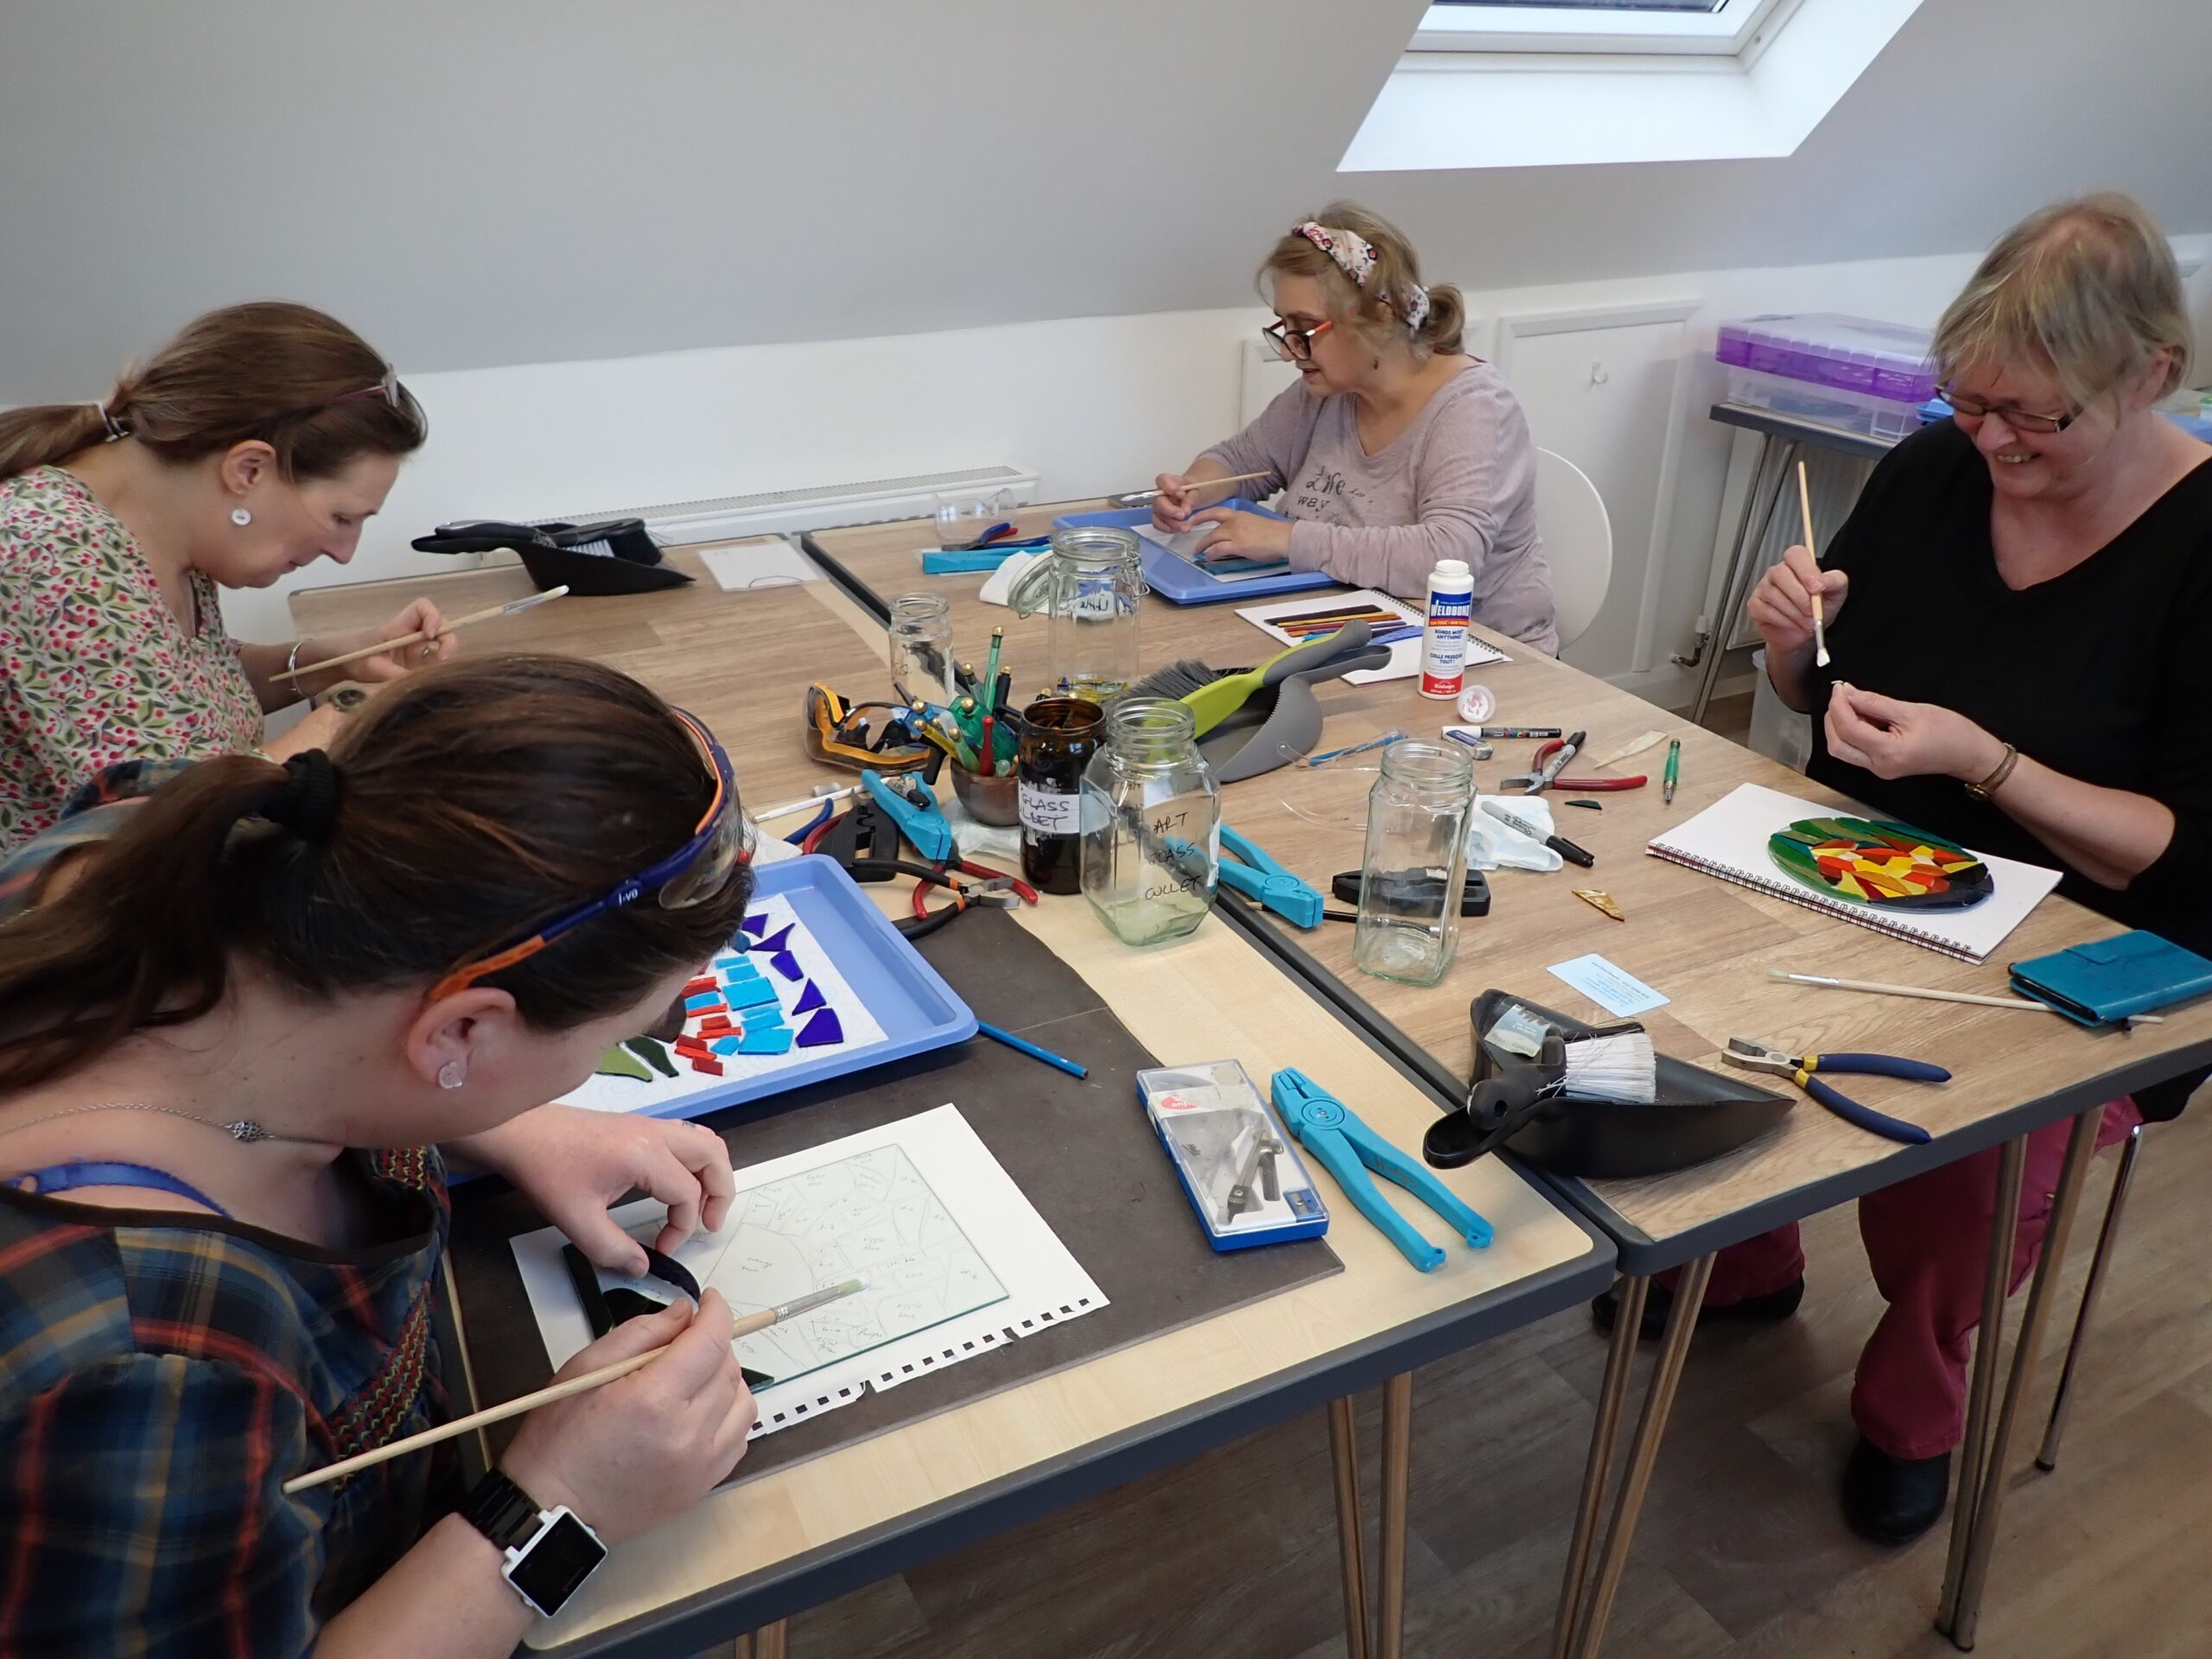 Four visitors to Creative Retreats and Holidays' glass studio glue their stained glass mosaics before finishing them with grout